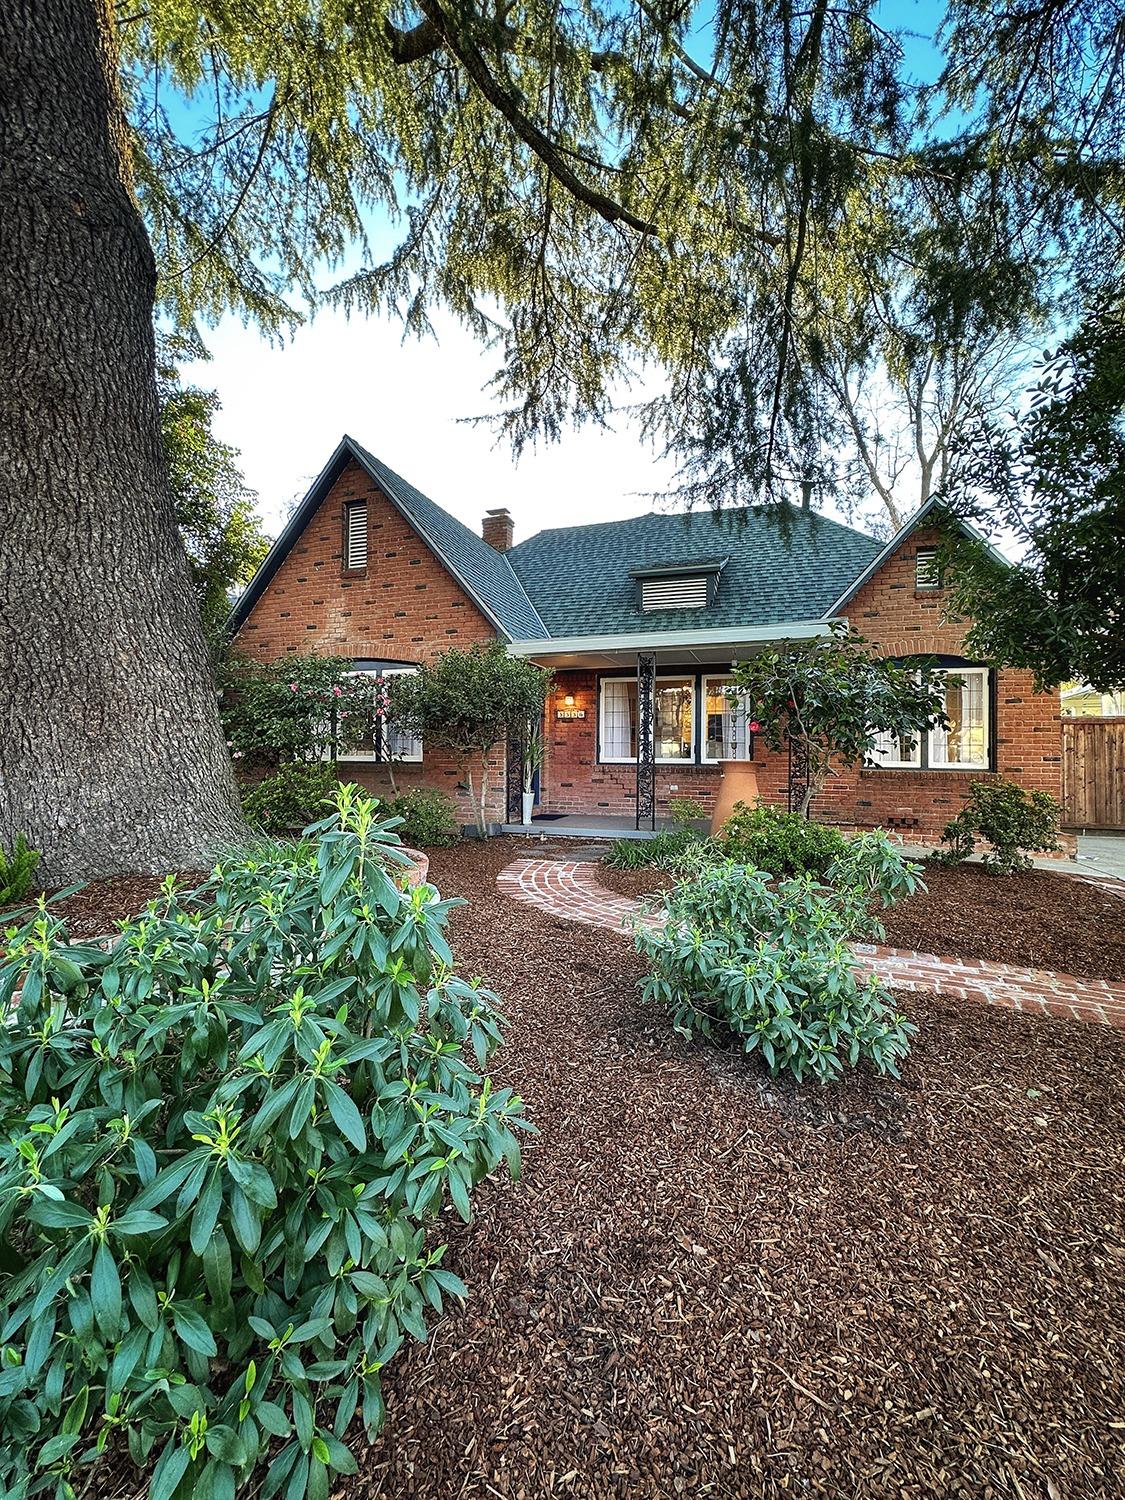 OOOH!!!Such a great home! Hansel and Gretel would have loved to call this 1925 charming brick tudor 